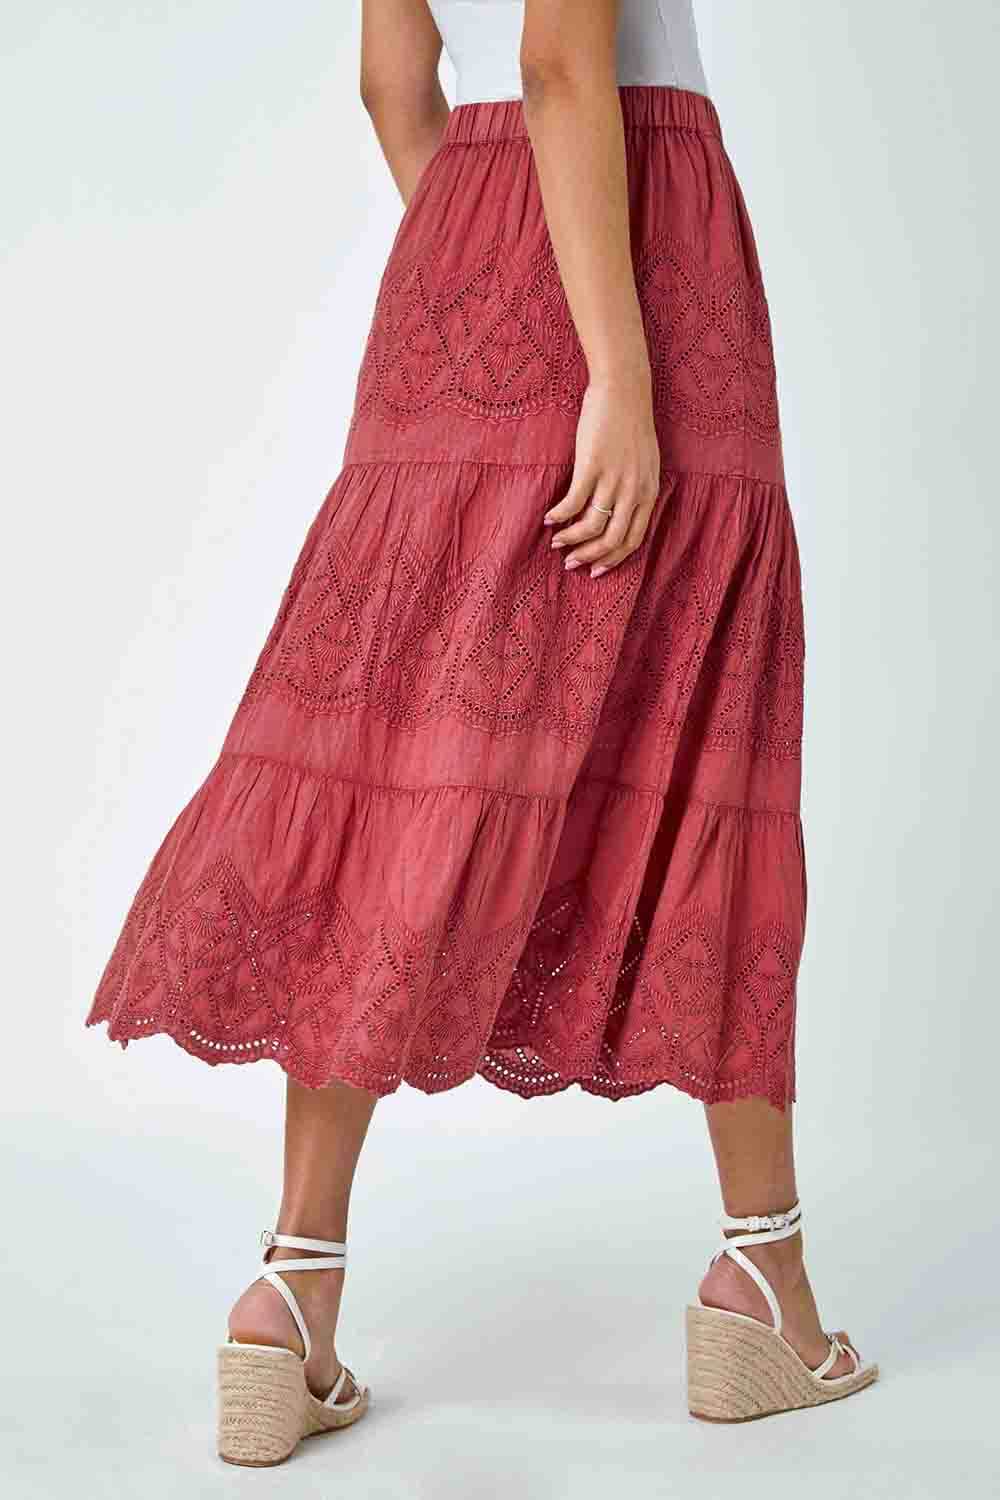 Rust Broderie Tiered Stretch Midi Skirt, Image 3 of 5